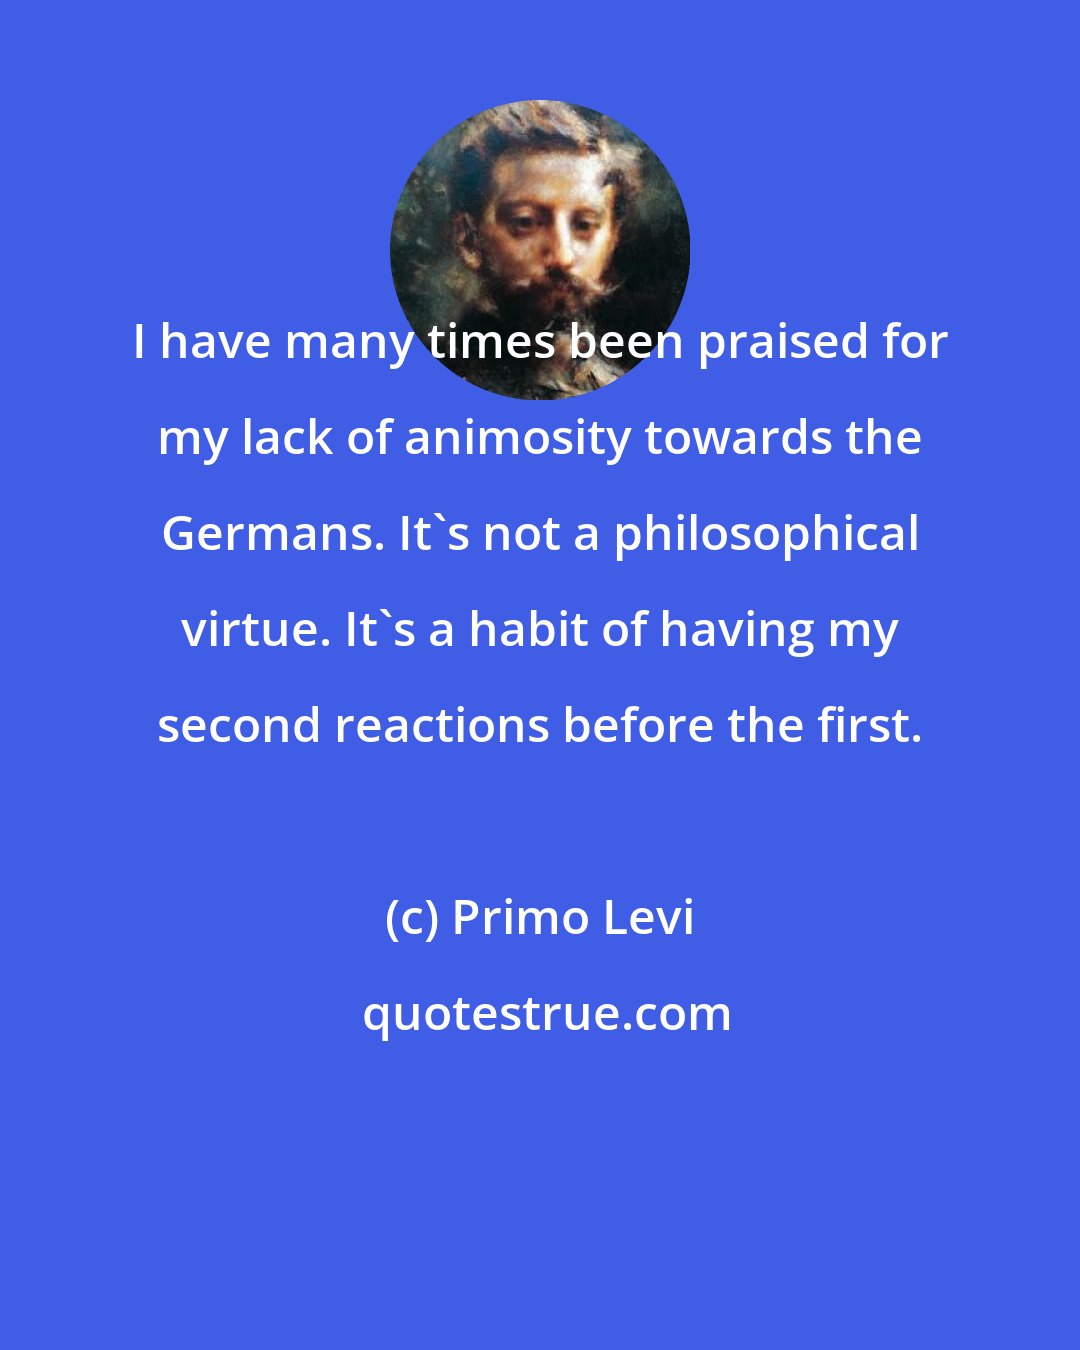 Primo Levi: I have many times been praised for my lack of animosity towards the Germans. It's not a philosophical virtue. It's a habit of having my second reactions before the first.